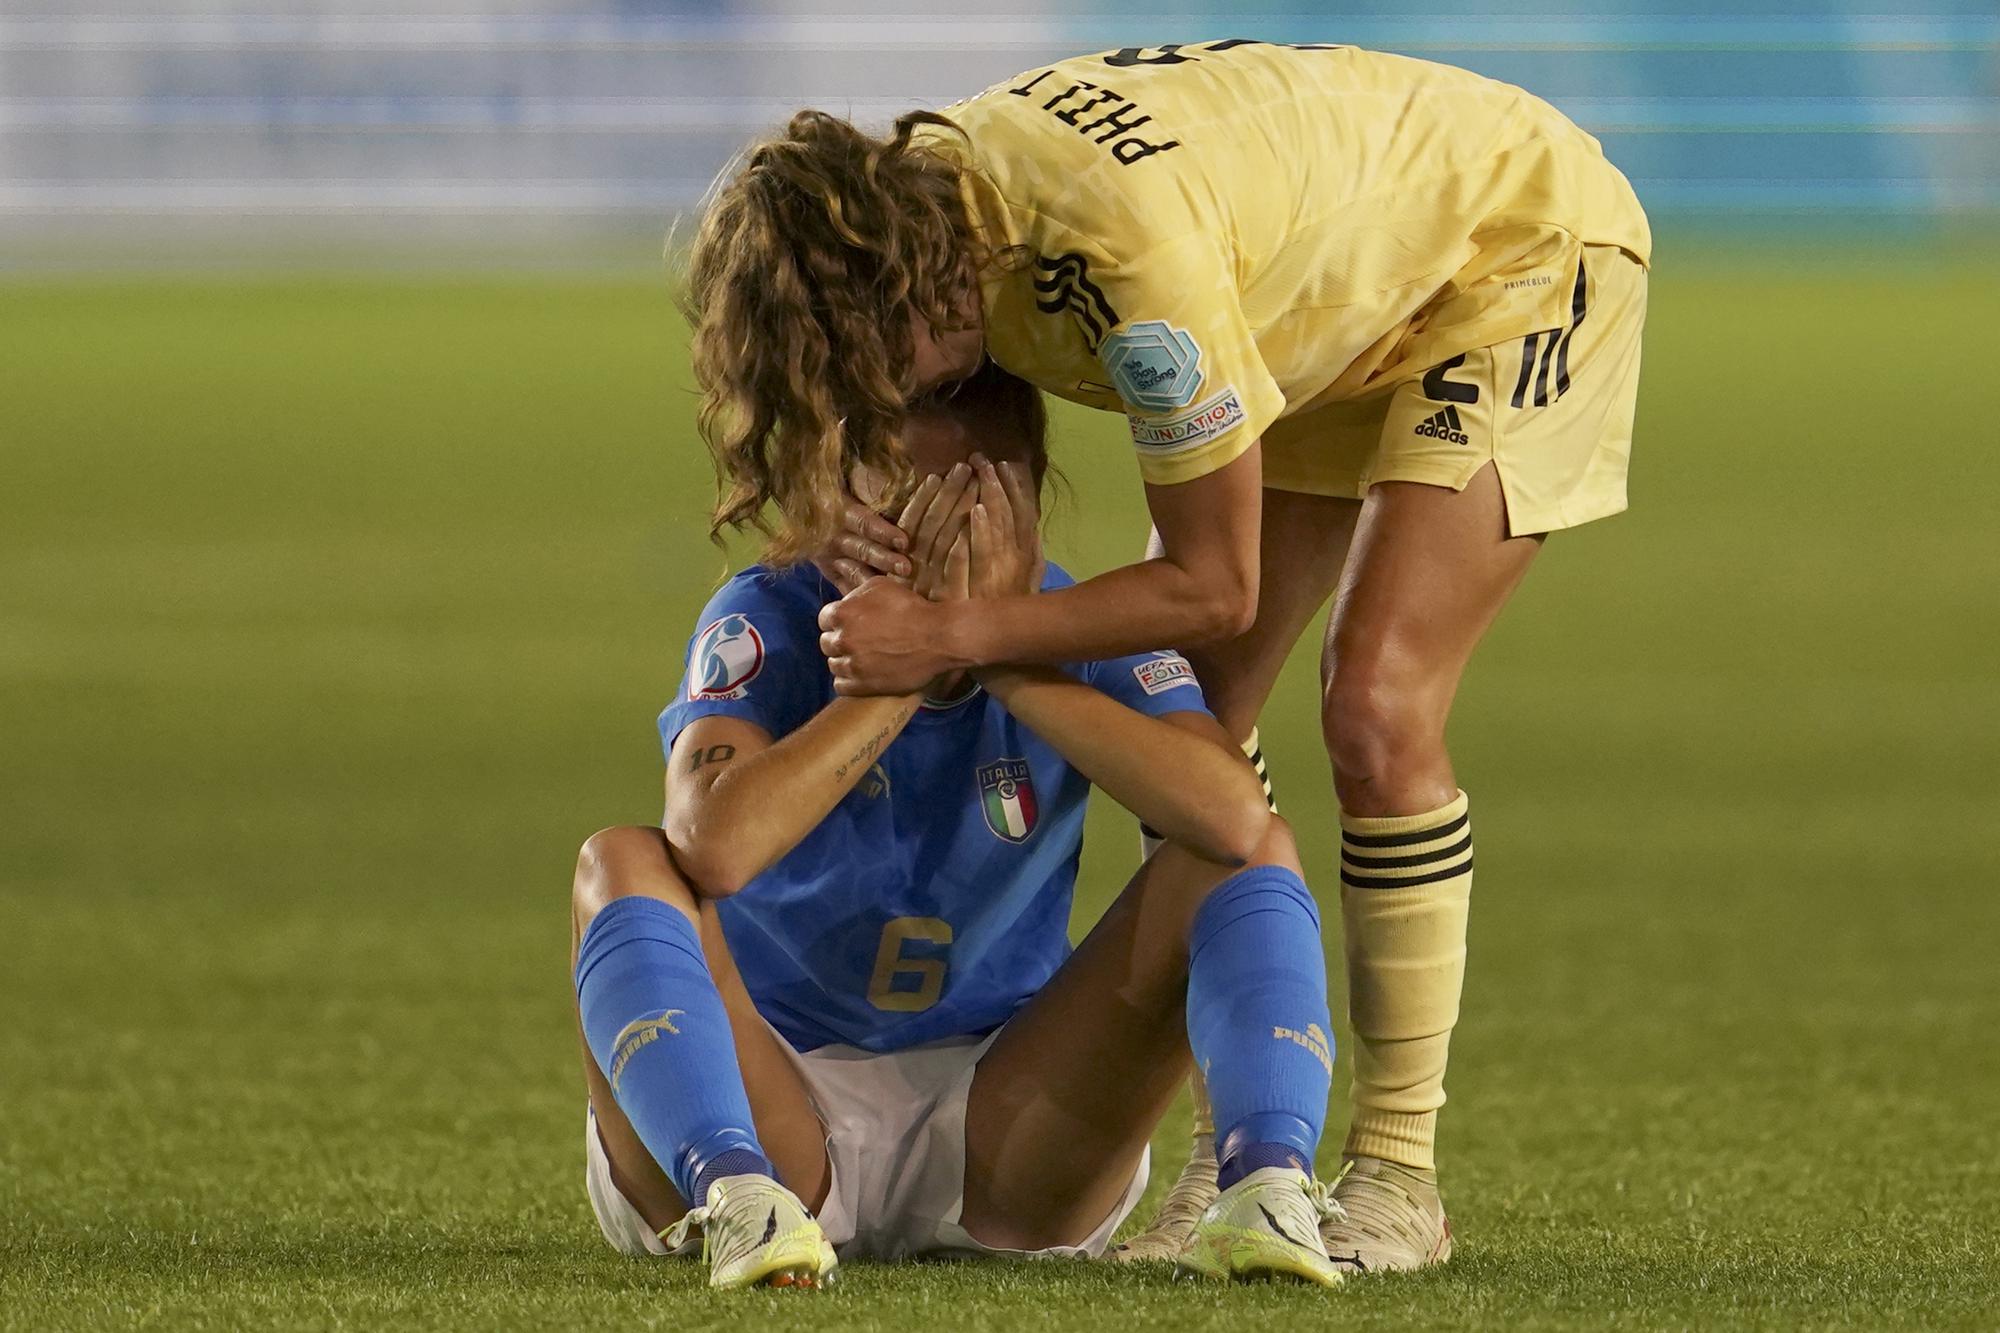 FILE - Belgium's Davina Philtjens comforts Italy's Manuela Giugliano sitting on the ground at the end of the Women Euro 2022 group D soccer match between Italy and Belgium at the Manchester City Academy Stadium, in Manchester, England, Monday, July 18, 2022. Belgium won 1-0 to advance to the quarterfinals. (AP Photo/Jon Super, File)